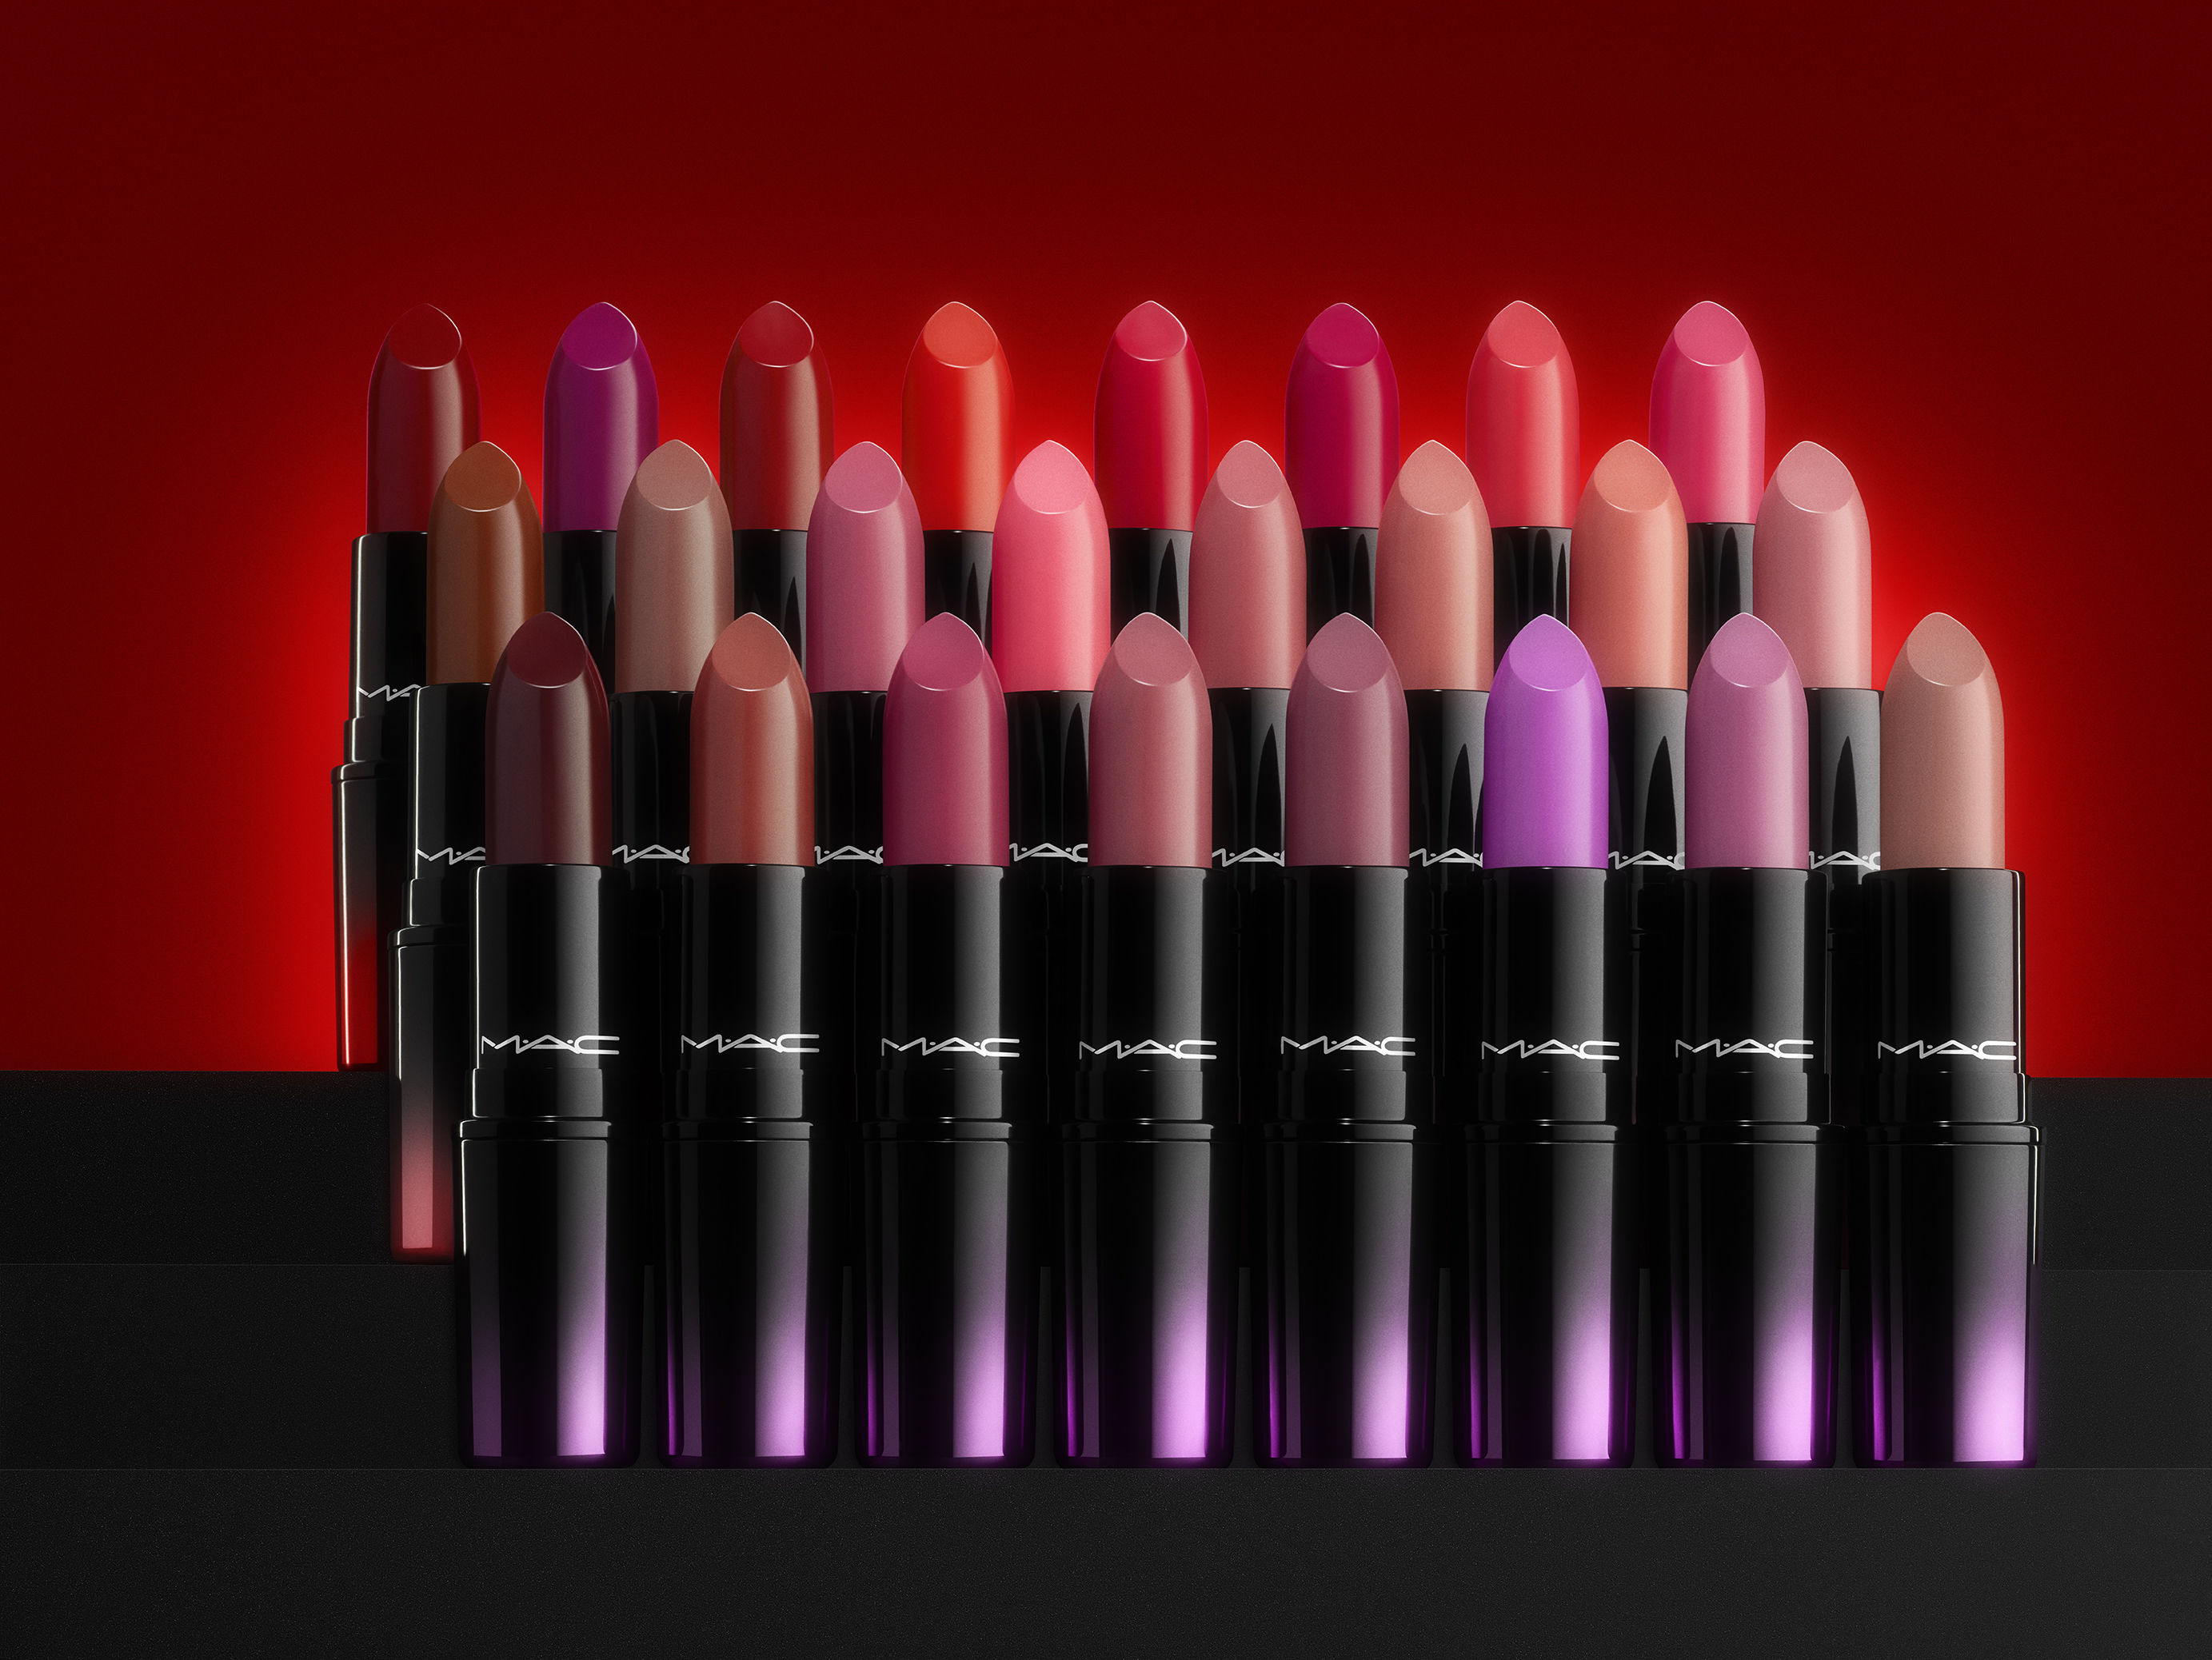 The New M A C Lipsticks Are Here And We